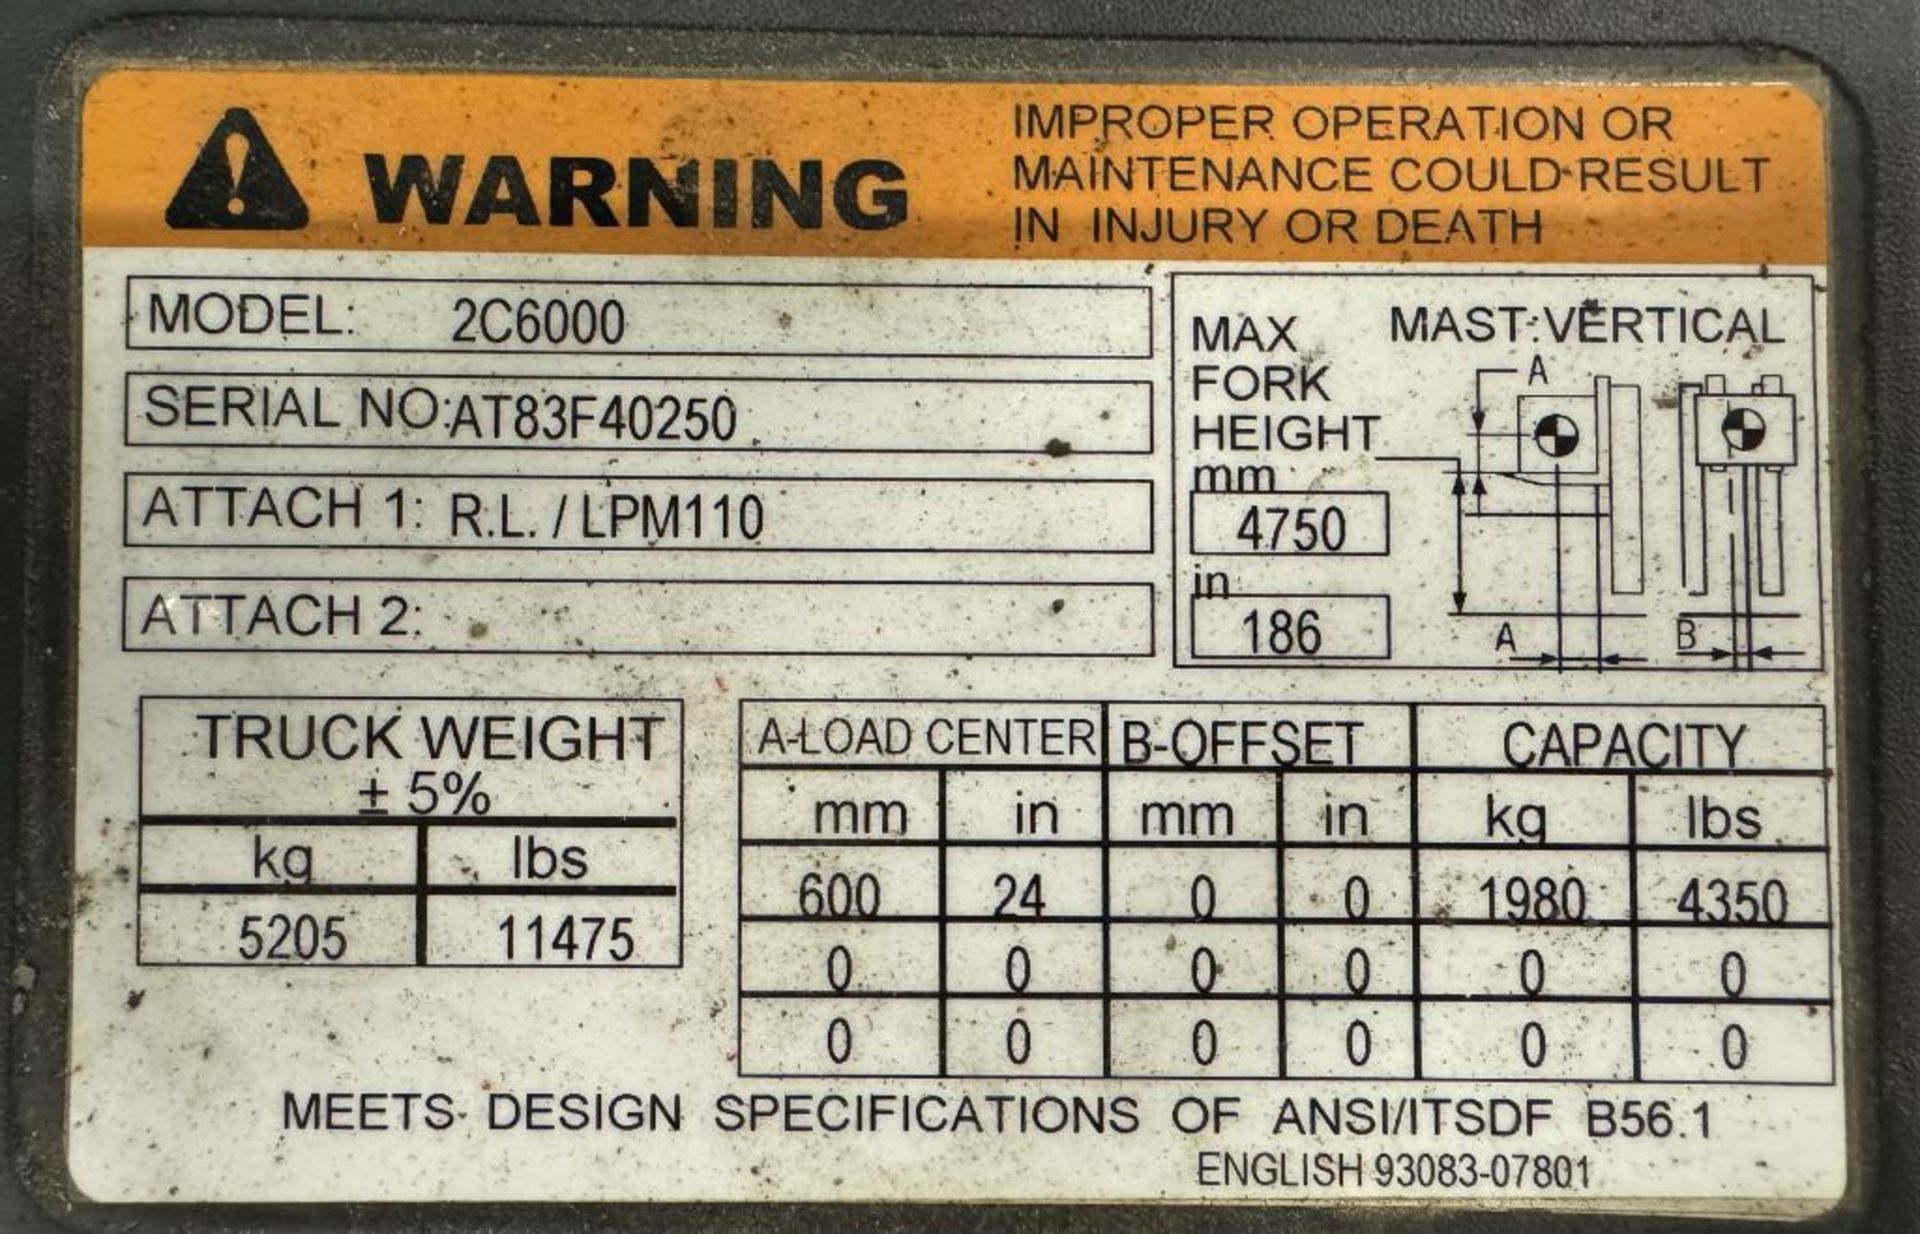 Caterpillar Approximate 6000 Pound LP Forklift, Model 2C6000, Serial# AT83F40250. UL Classified, app - Image 14 of 14